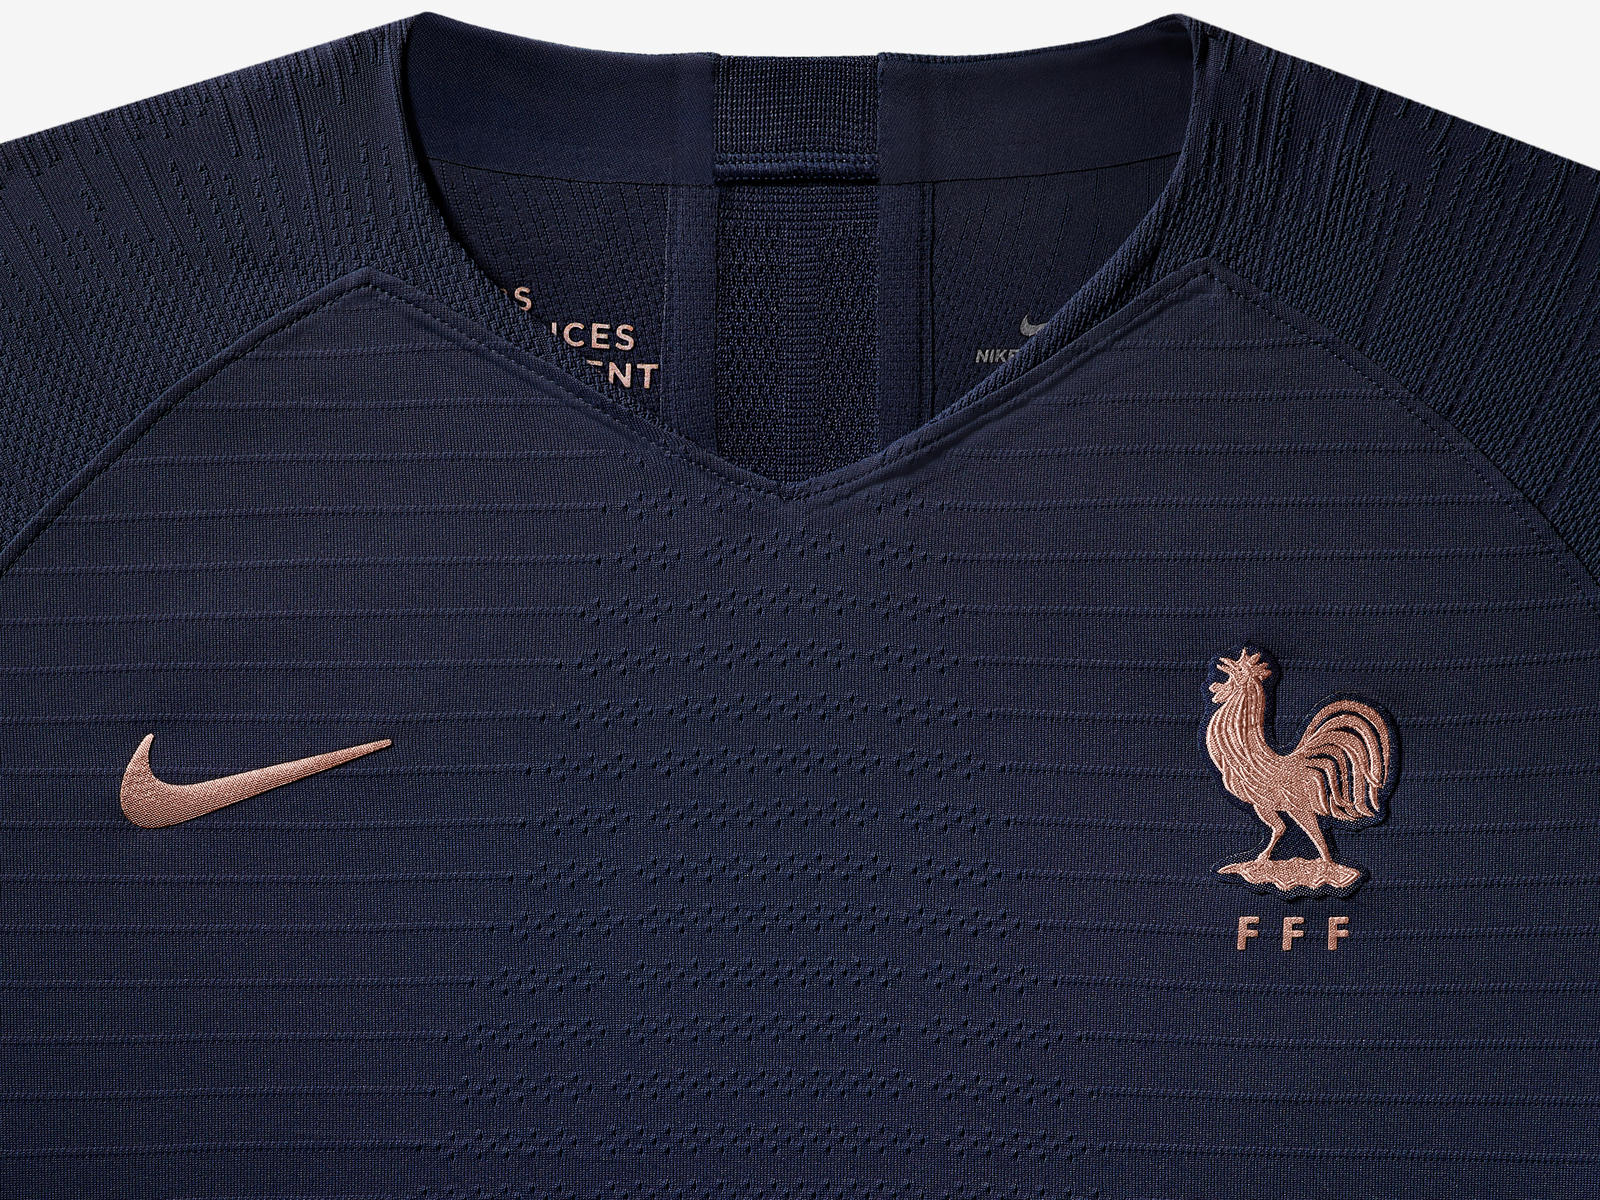 france new jersey 2019